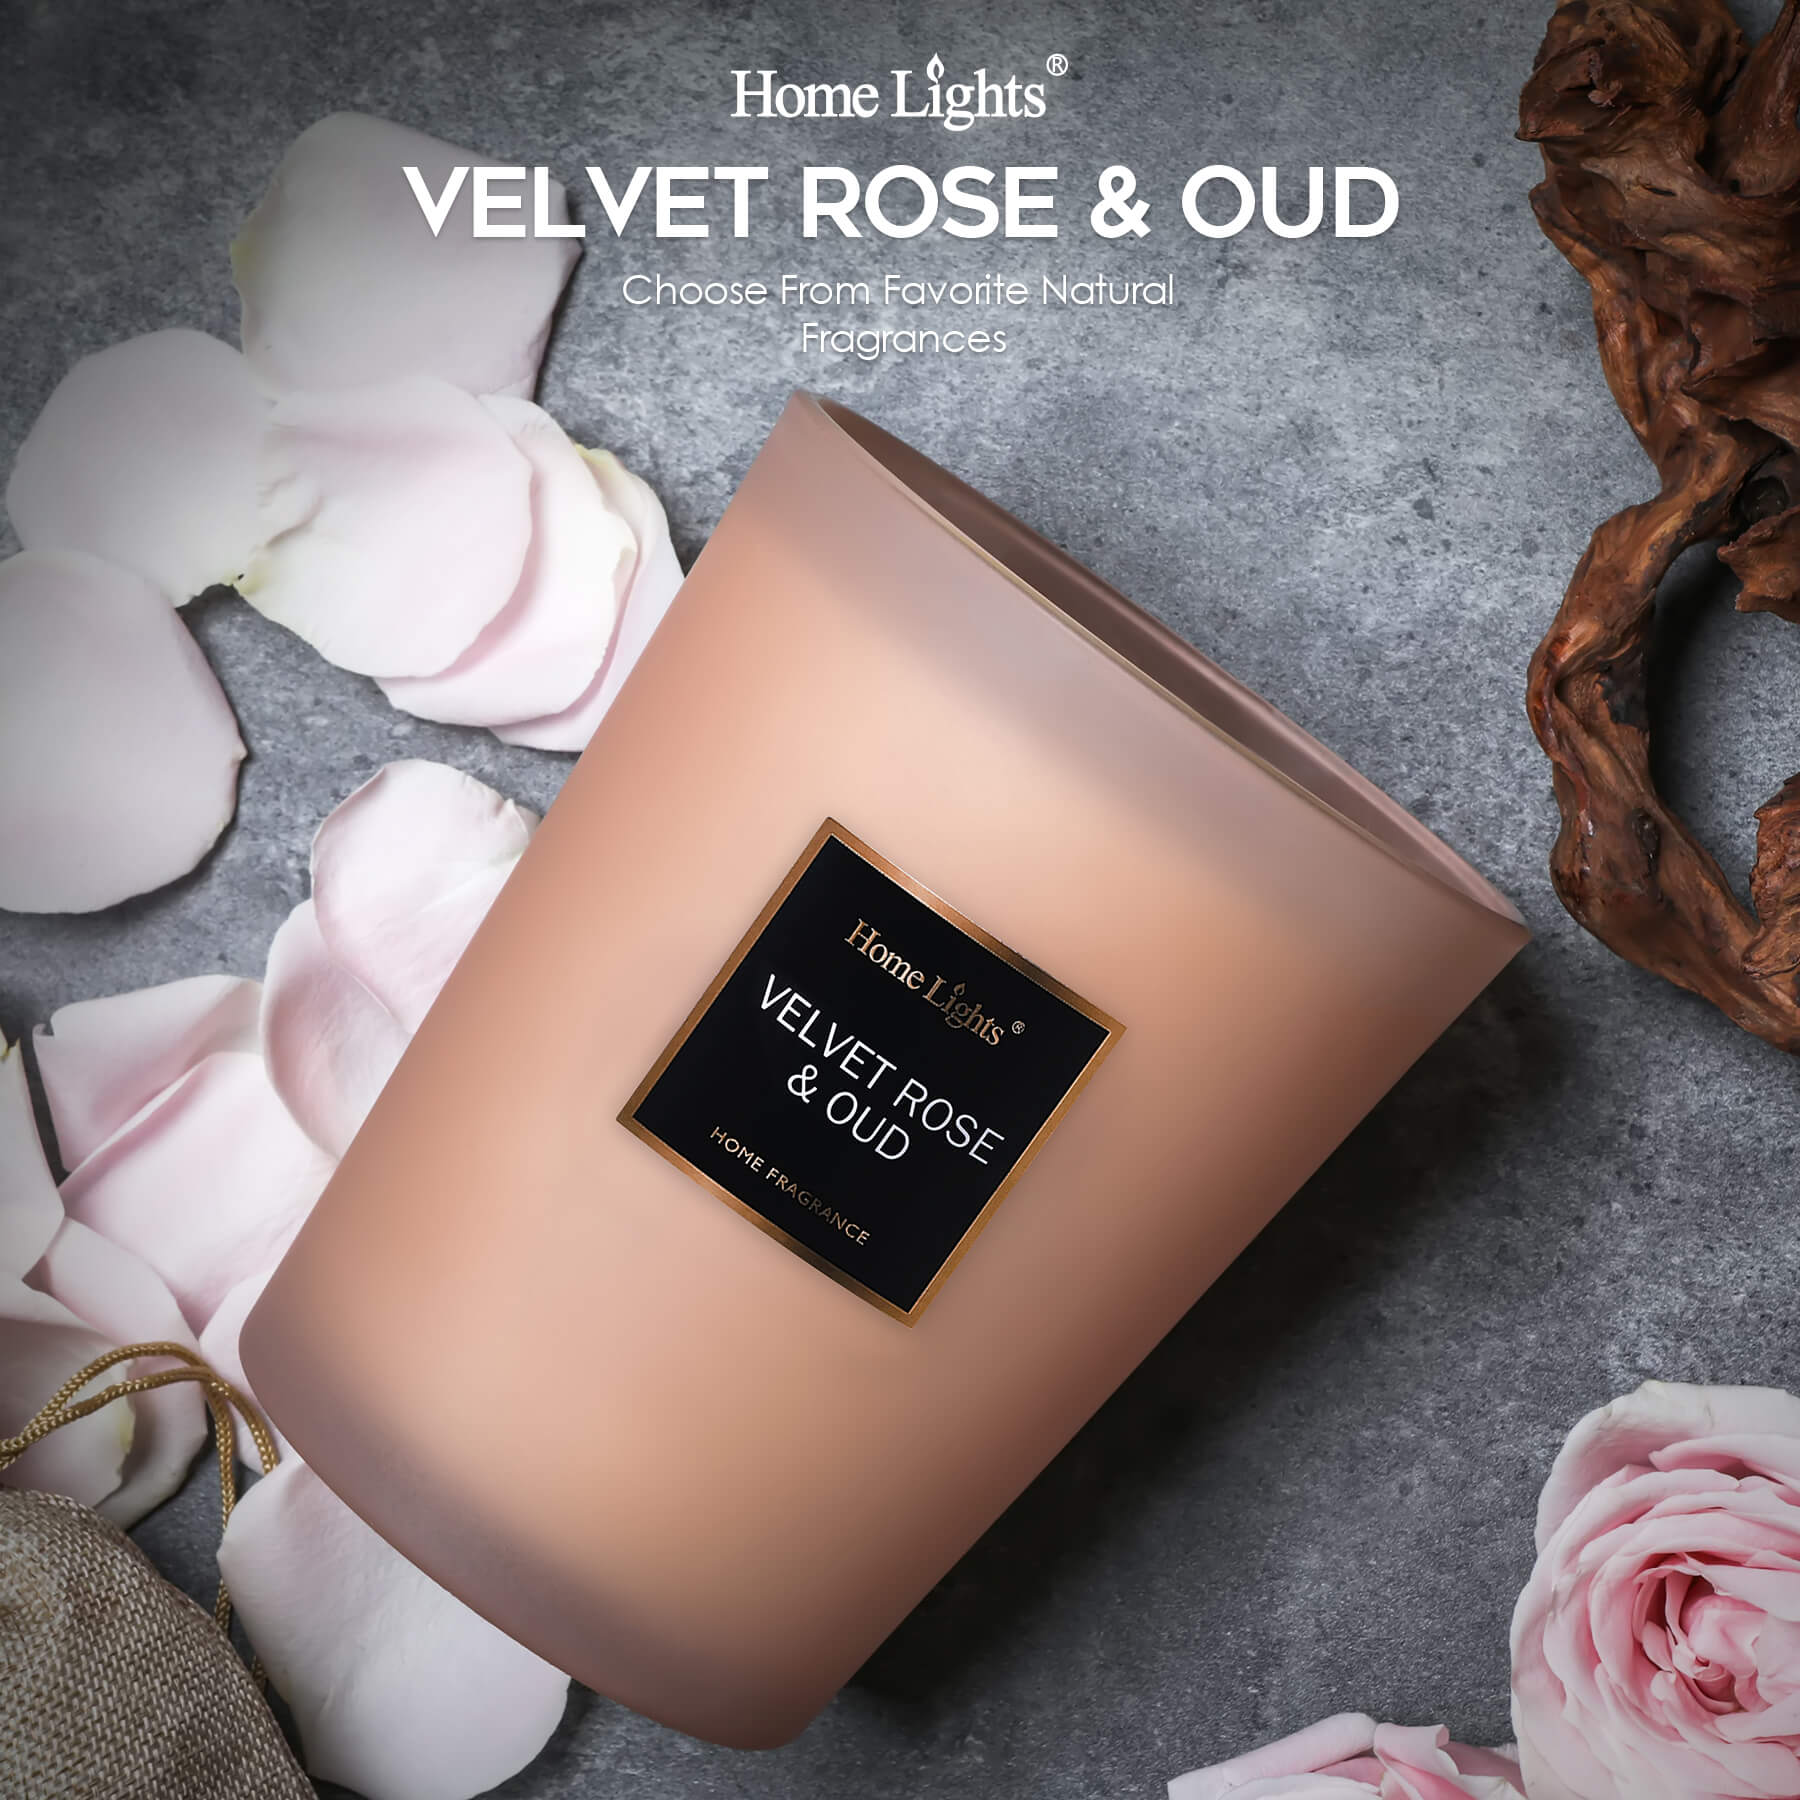 OUD HOME COLLECTION